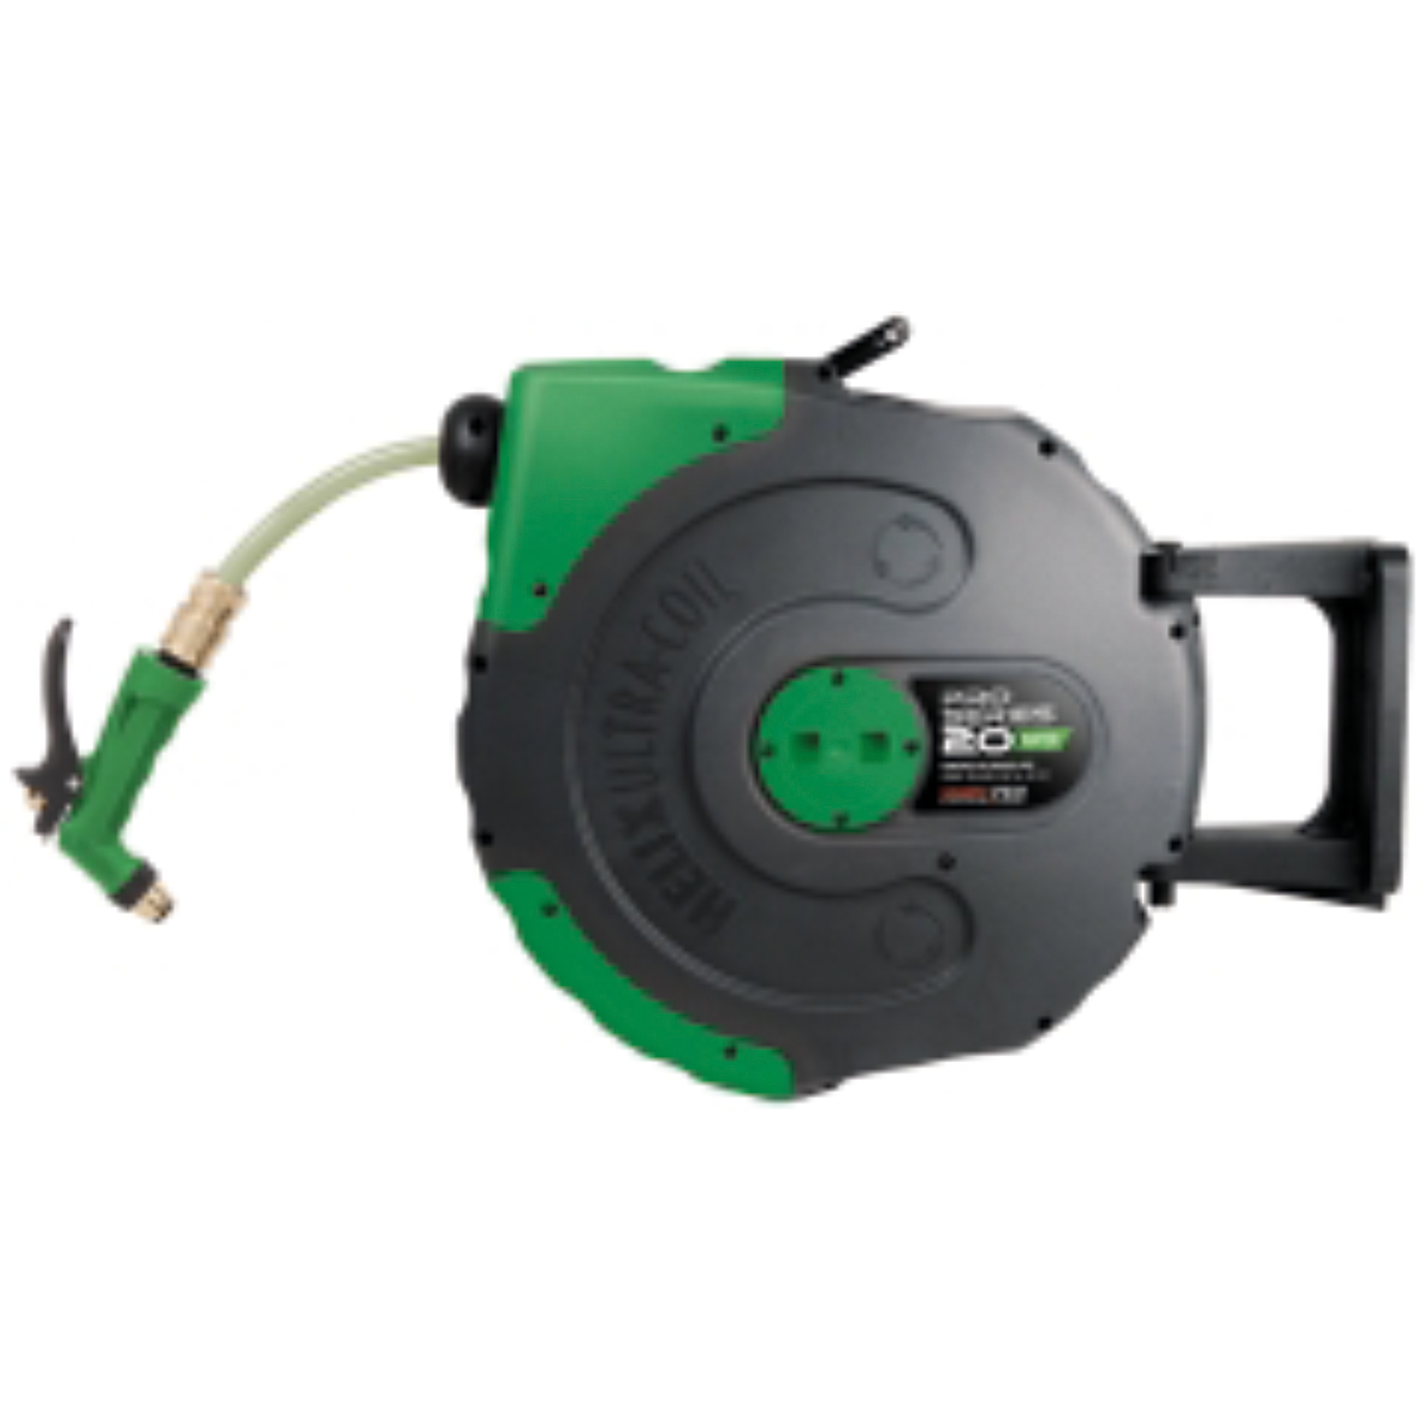 Havy Duty Water Hose Reel comes with Hose